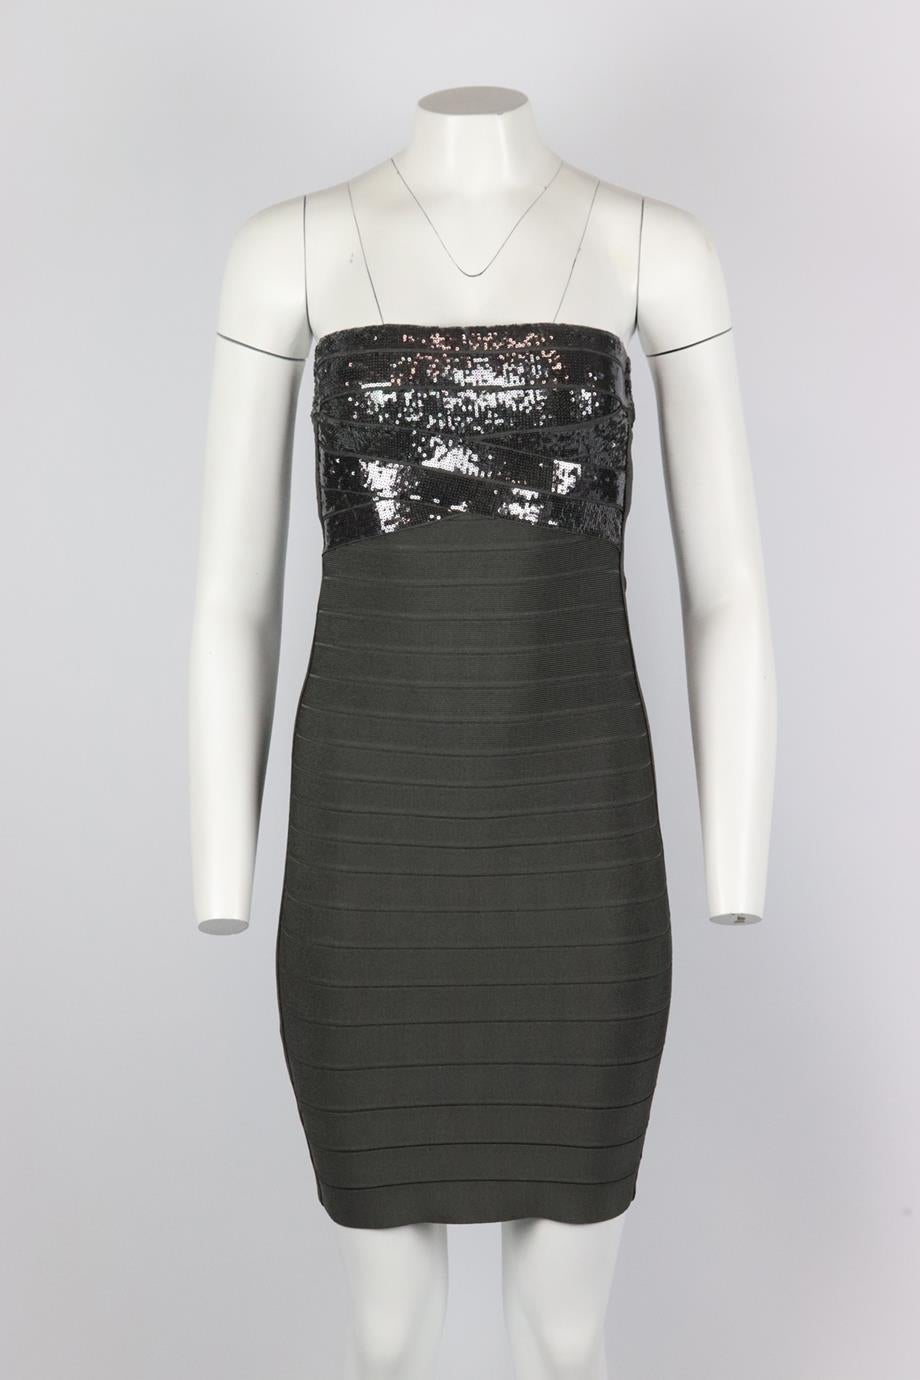 Herve Leger strapless sequined bandage mini dress. Dark-grey. Sleeveless, bandeau. Zip fastening at back. 90% Rayon, 9% nylon, 1% spandex. Size: Small (UK 8, US 4, FR 36, IT 40). Bust: 28.4 in. Waist: 26 in. Hips: 30.4 in. Length: 29 in. Very good